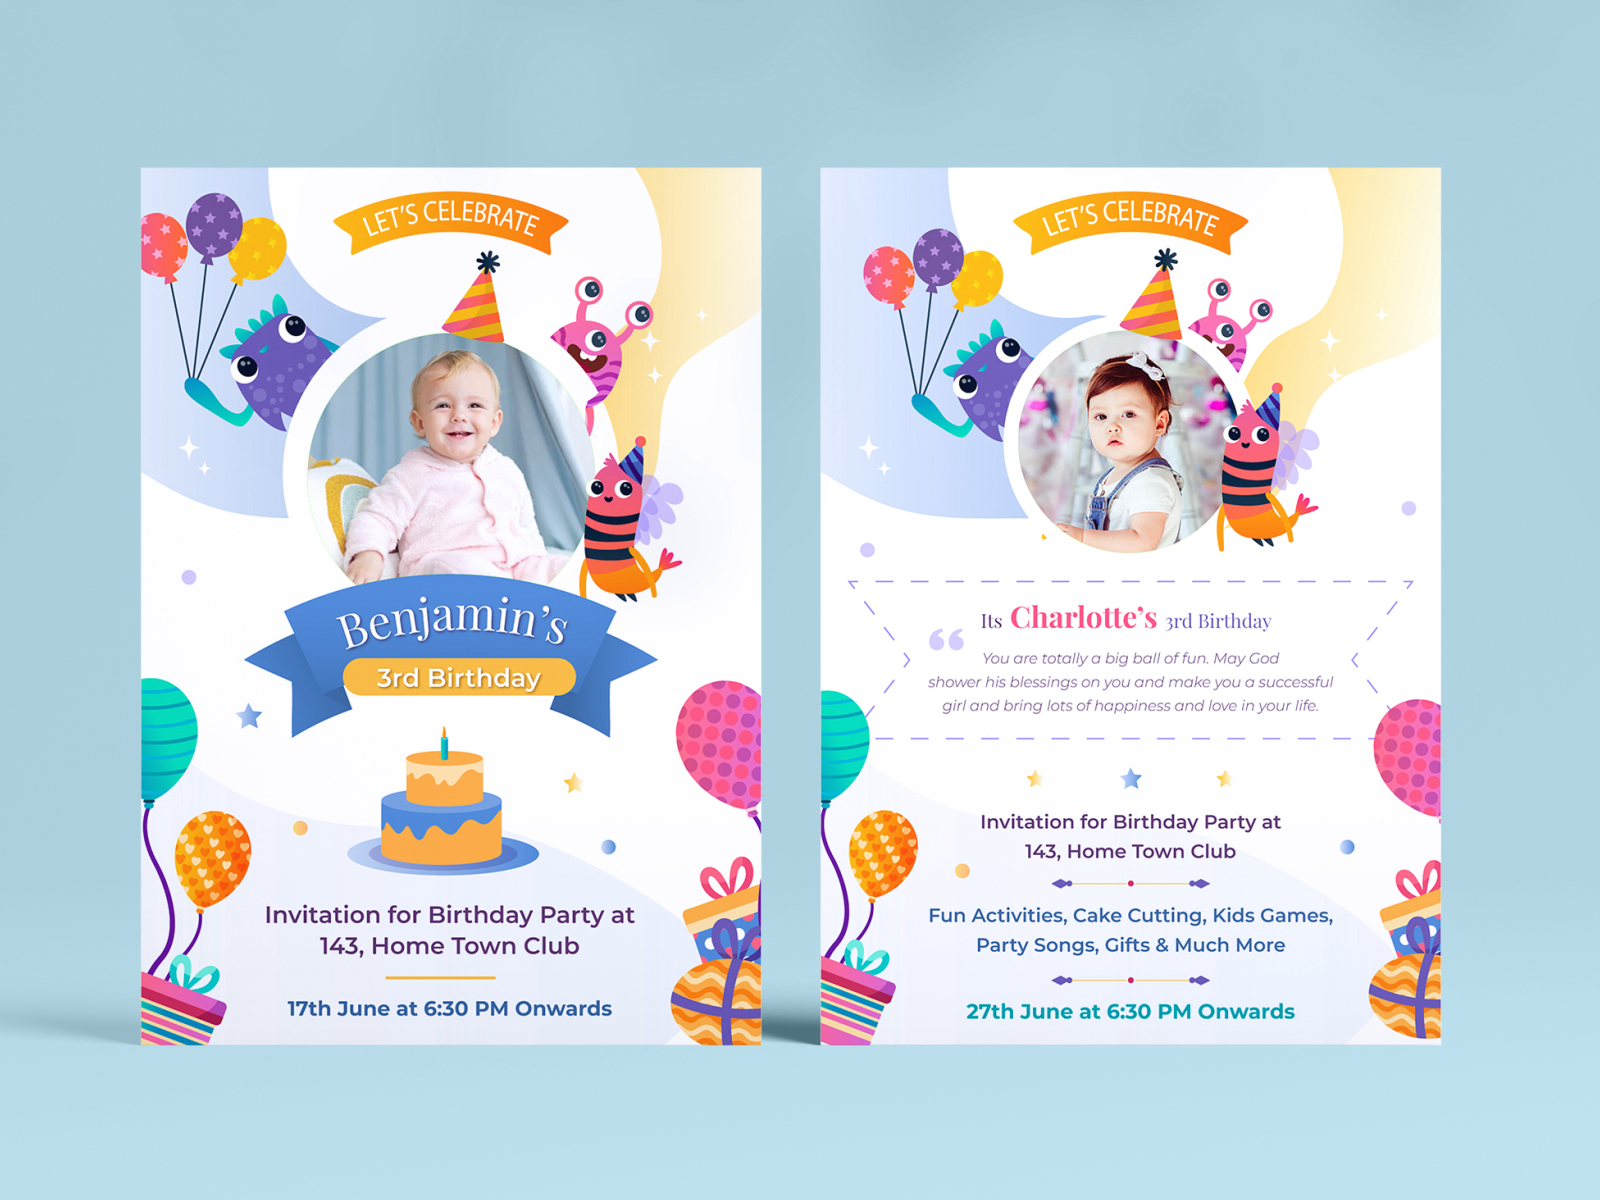 Birthday Party Invitation Cards Design by Harpreet Singh on Dribbble